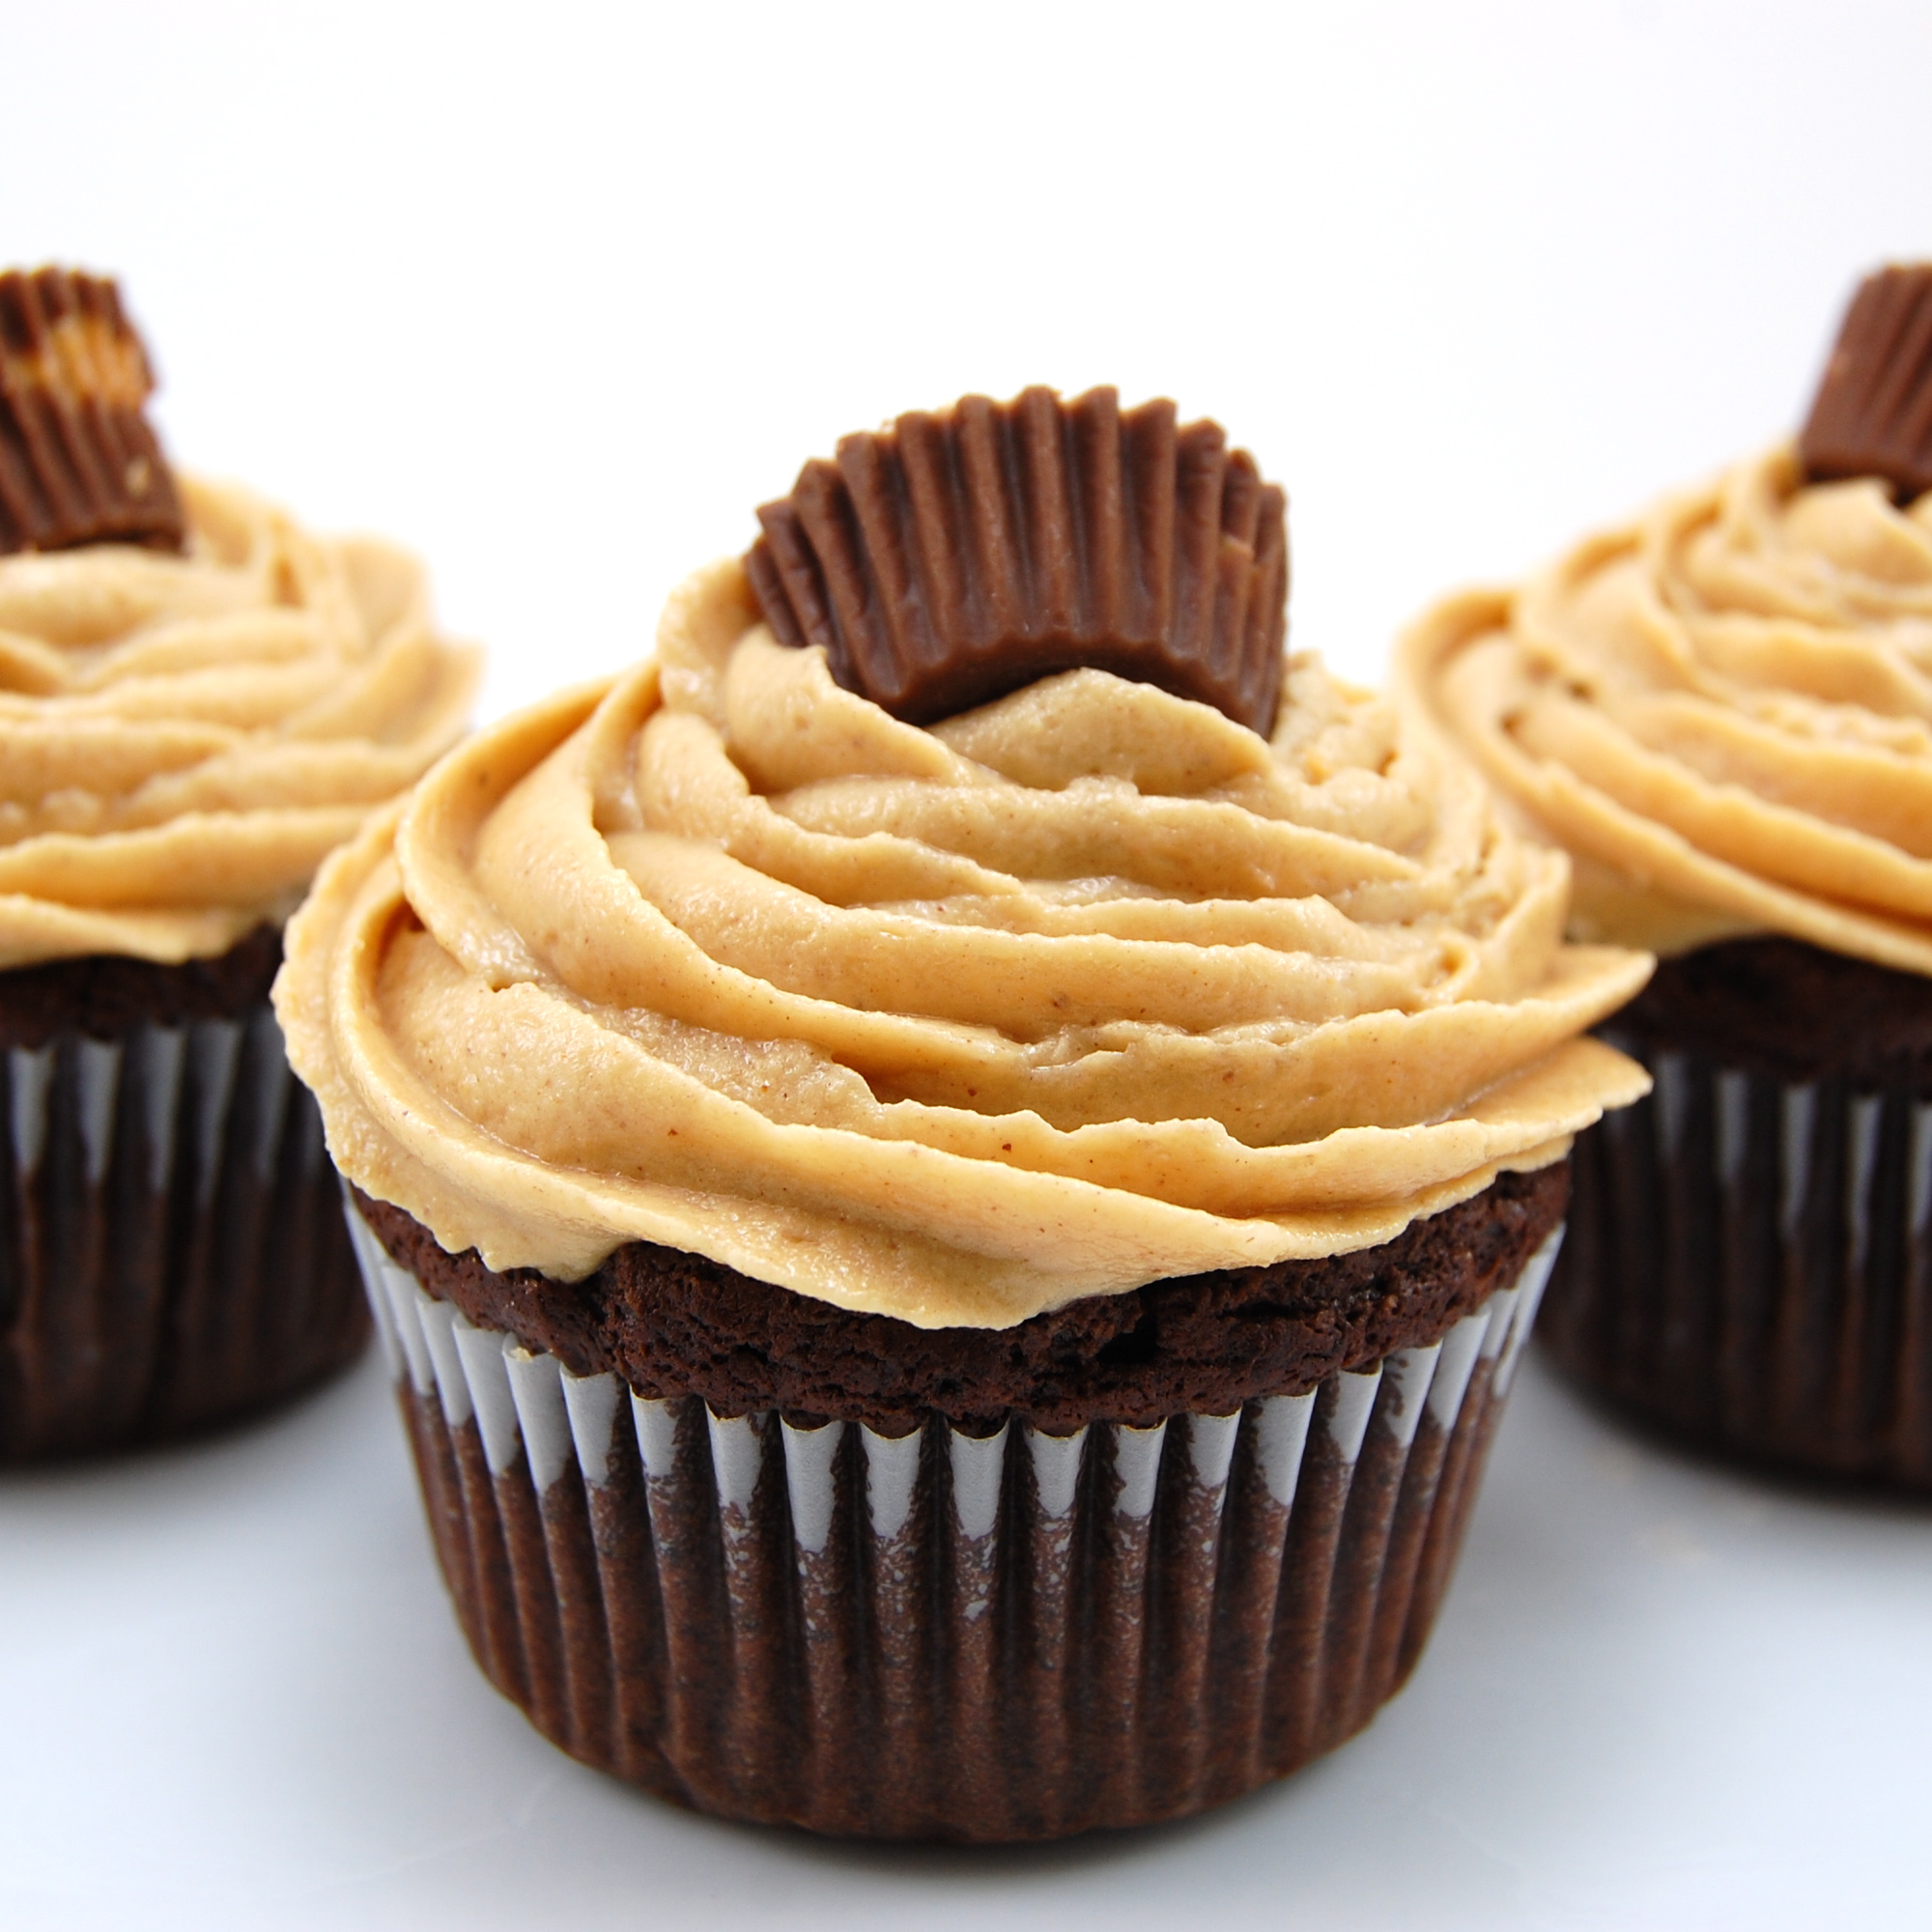 Sweet Pea S Kitchen Dark Chocolate Cupcakes With Peanut Butter Frosting